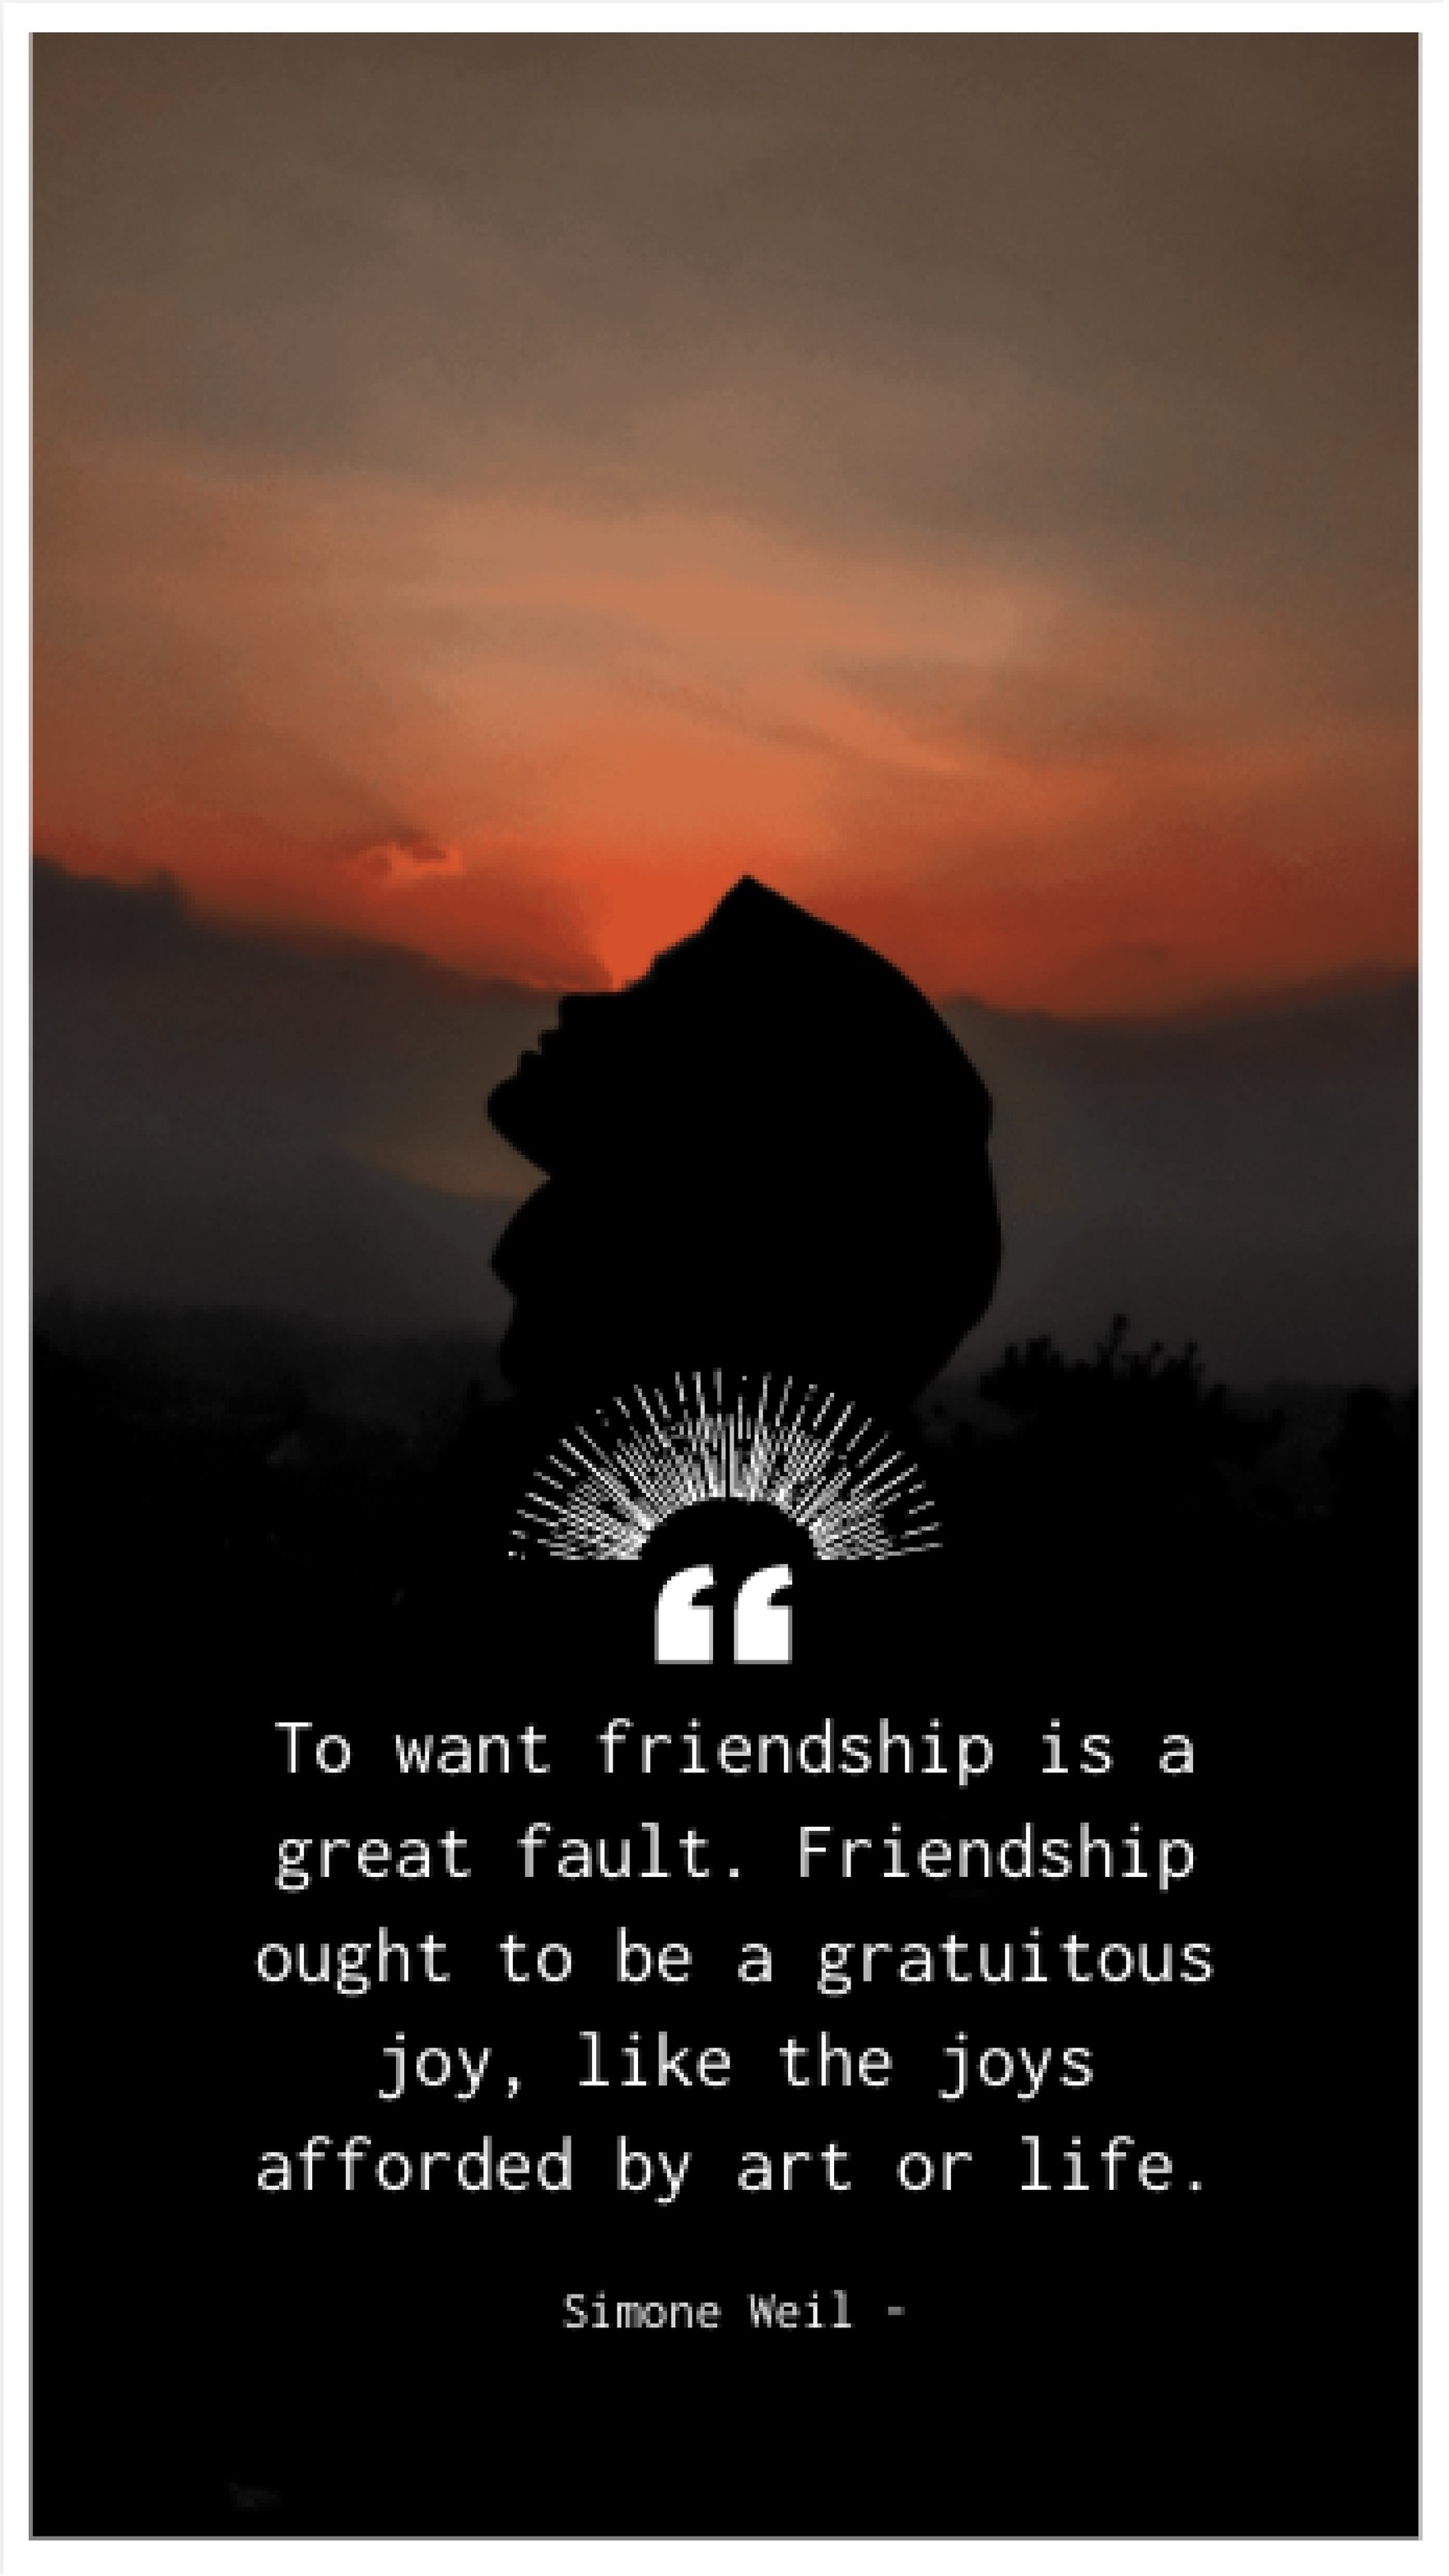 Simone Weil - To want friendship is a great fault. Friendship ought to be a gratuitous joy, like the joys afforded by art or life. Template